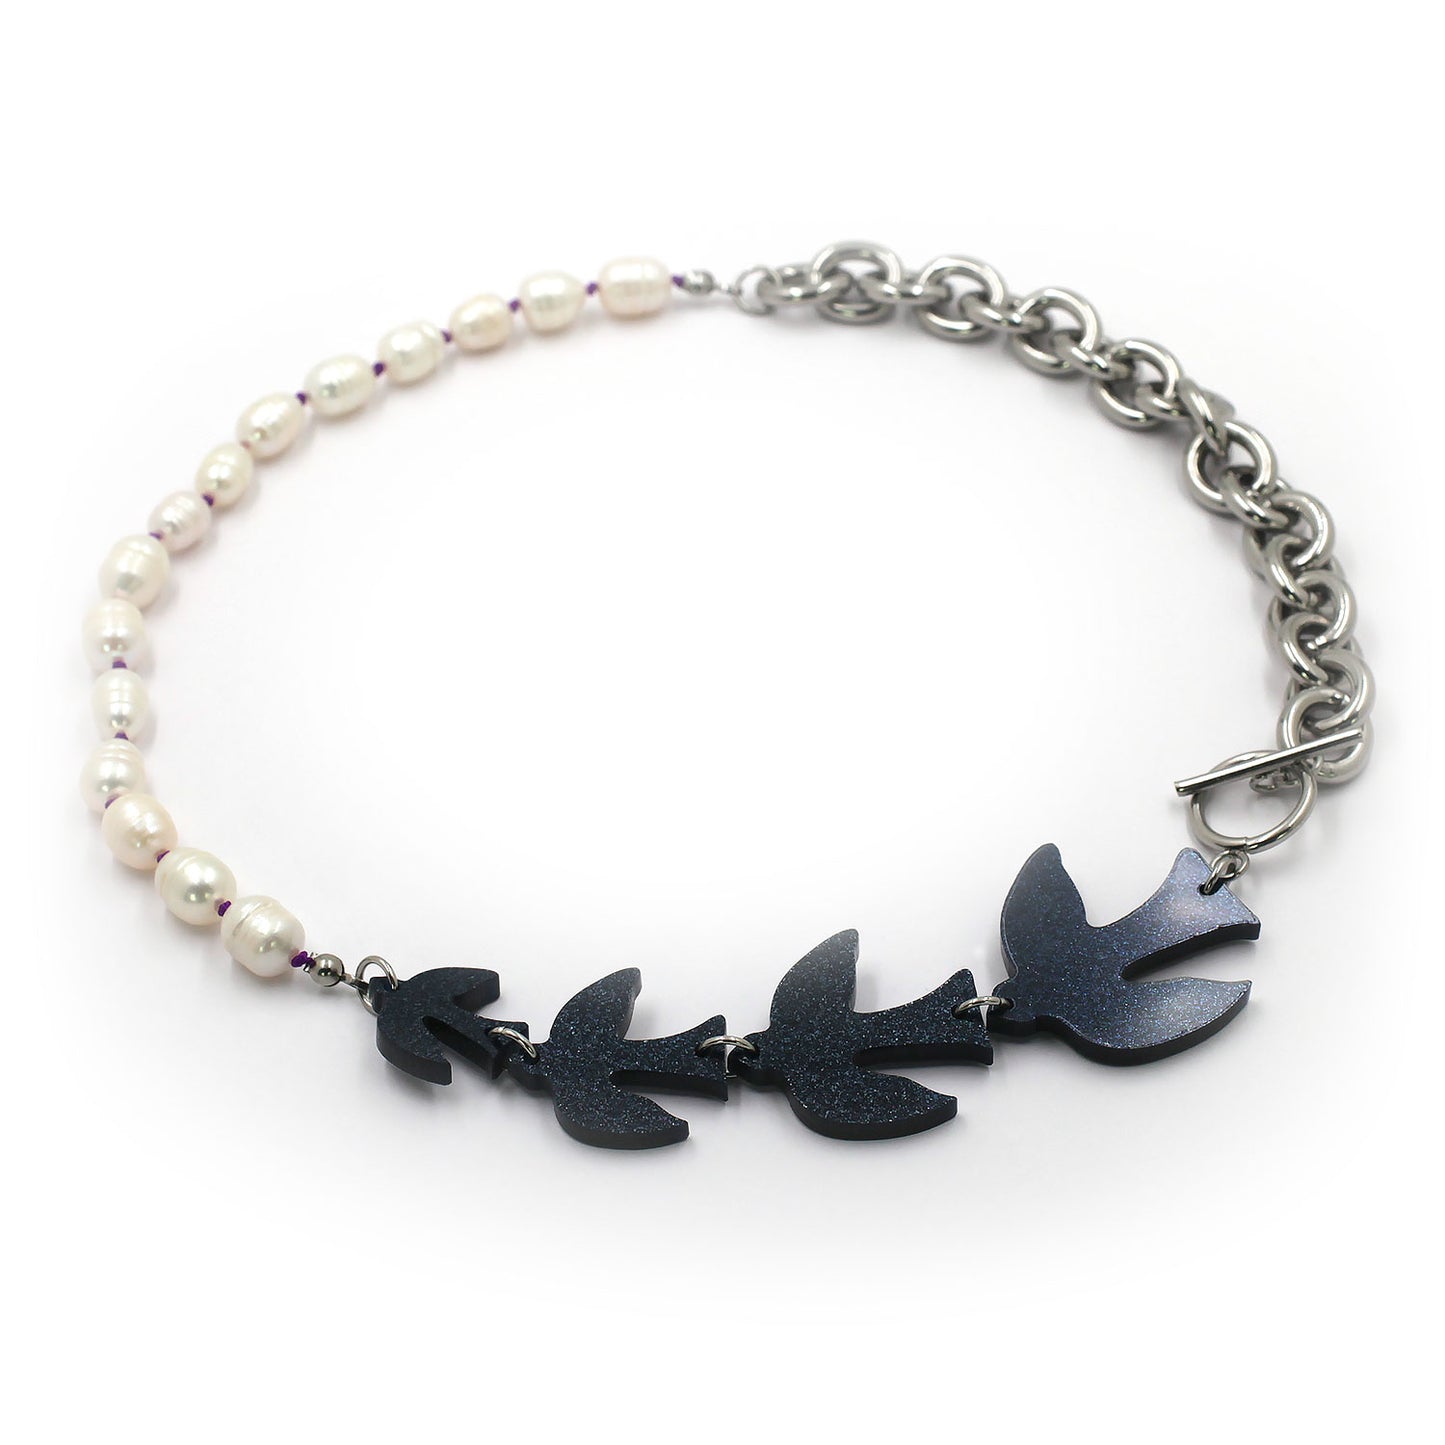 this is a collar necklace composed by four black glitters birds than pearls with a purple thread and a big chunky chain. the clasp is a  t bar. the background is white.  